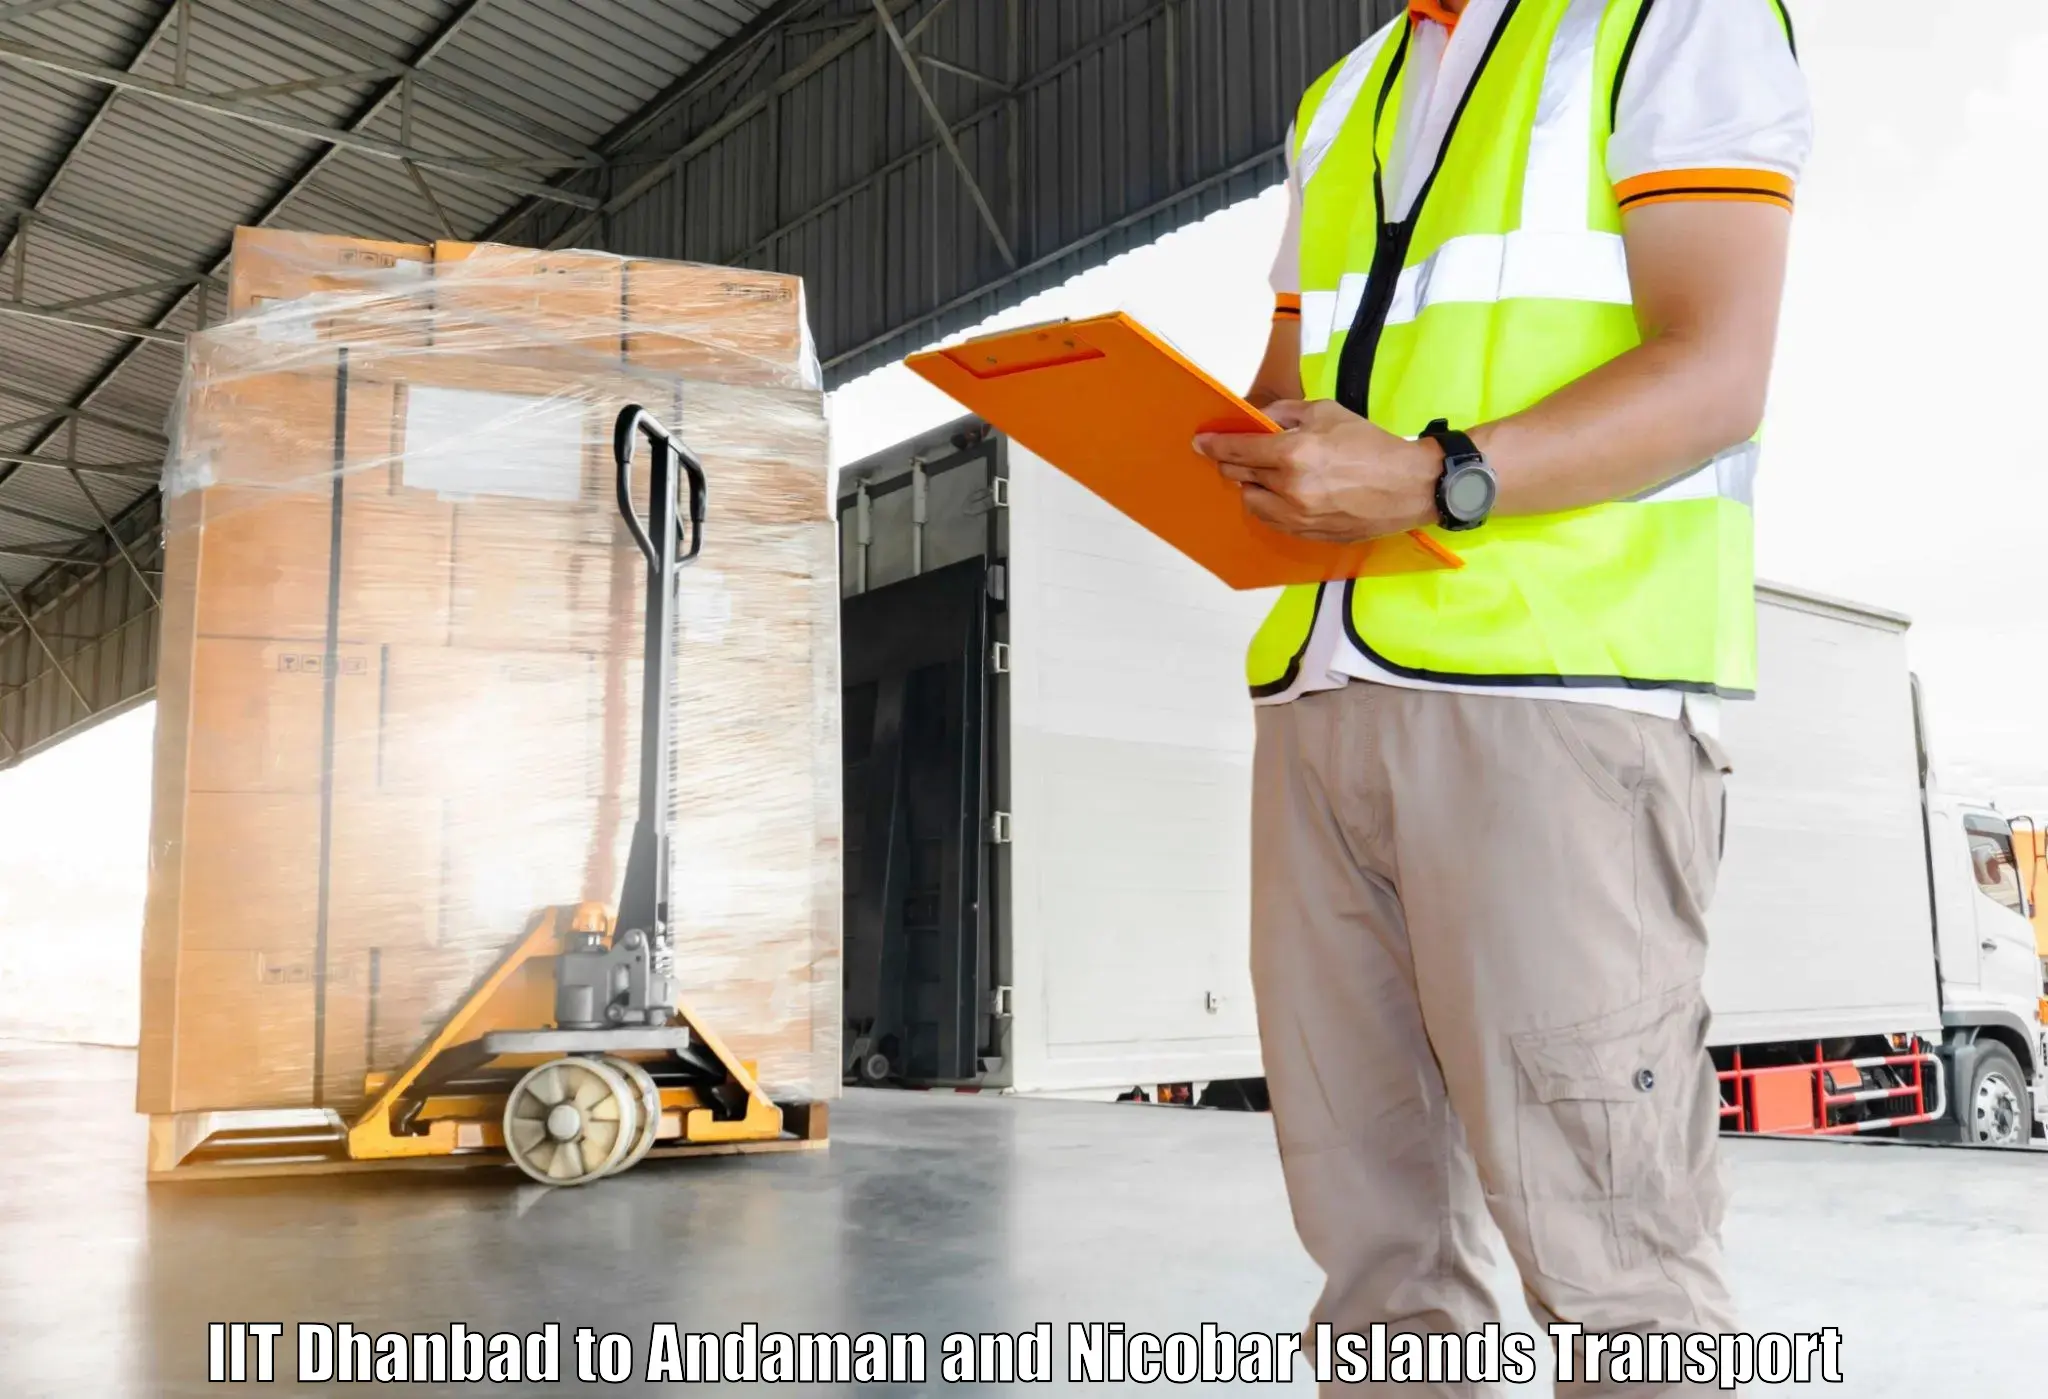 Cargo transport services in IIT Dhanbad to Port Blair